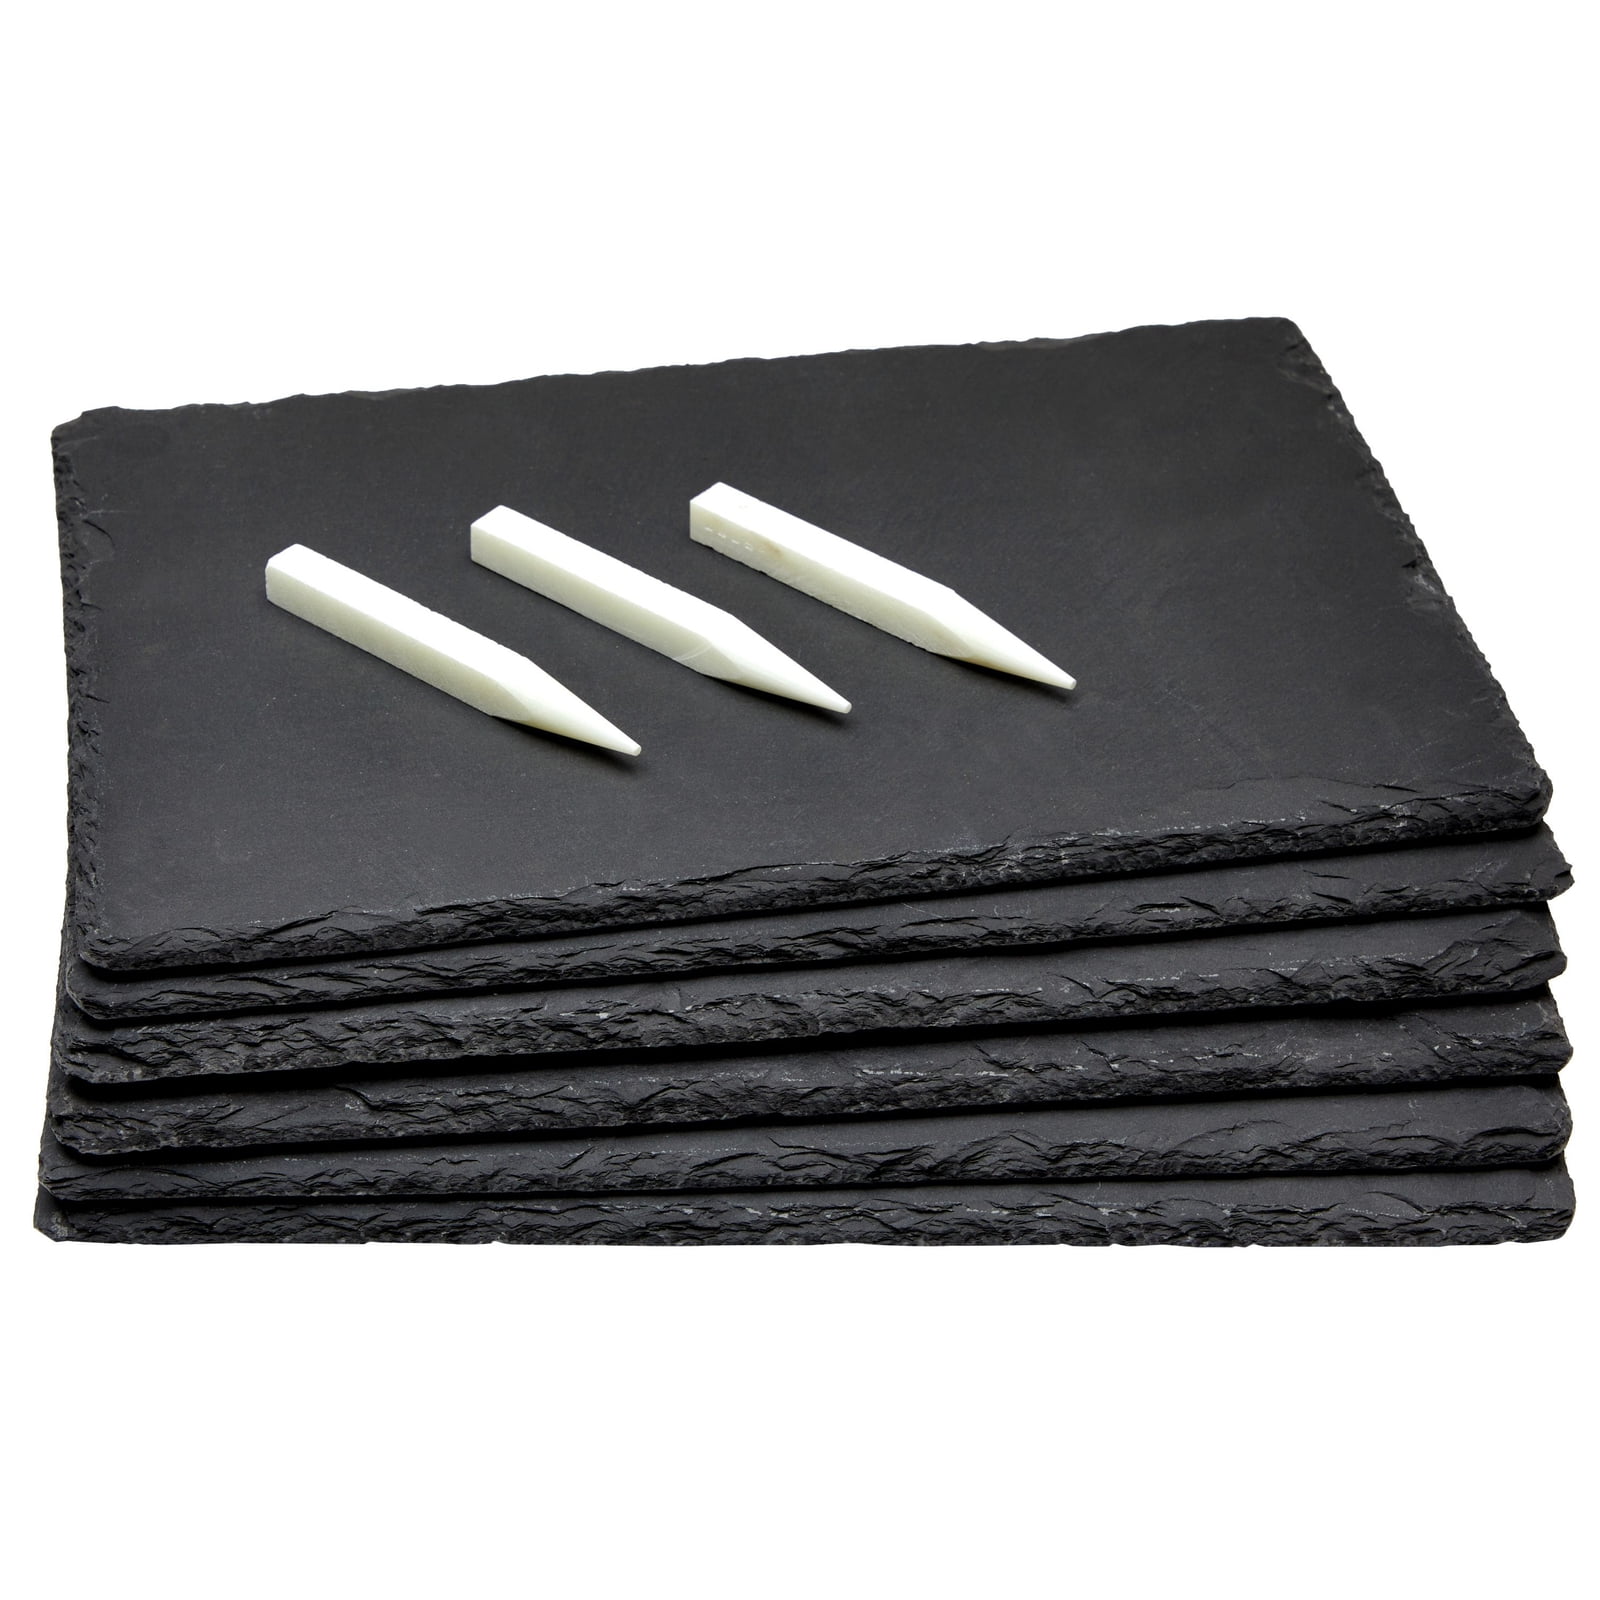 ,4pc Natural Stone Rock Black Cutting Board 30x20cm Luxury Large Slate Plates 12x8 In Cheese Board,Charcuterie Boards for Cheese,Sushi mat,Pastry,bread,Snack board and Meat Set 